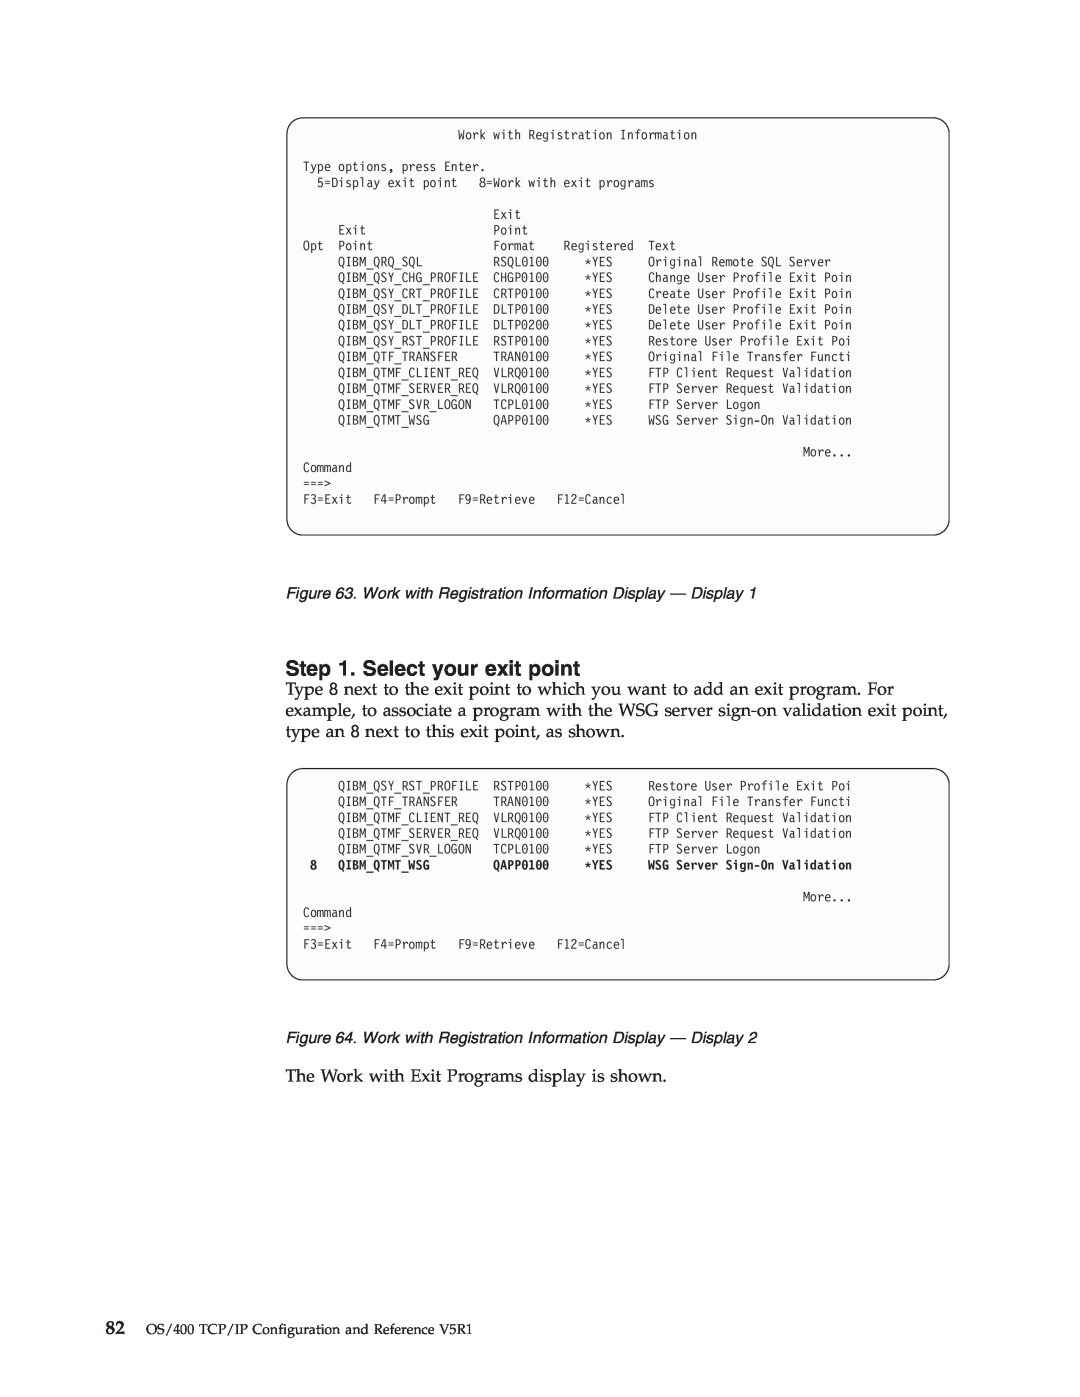 IBM SC41-5420-04 manual Select your exit point, The Work with Exit Programs display is shown 